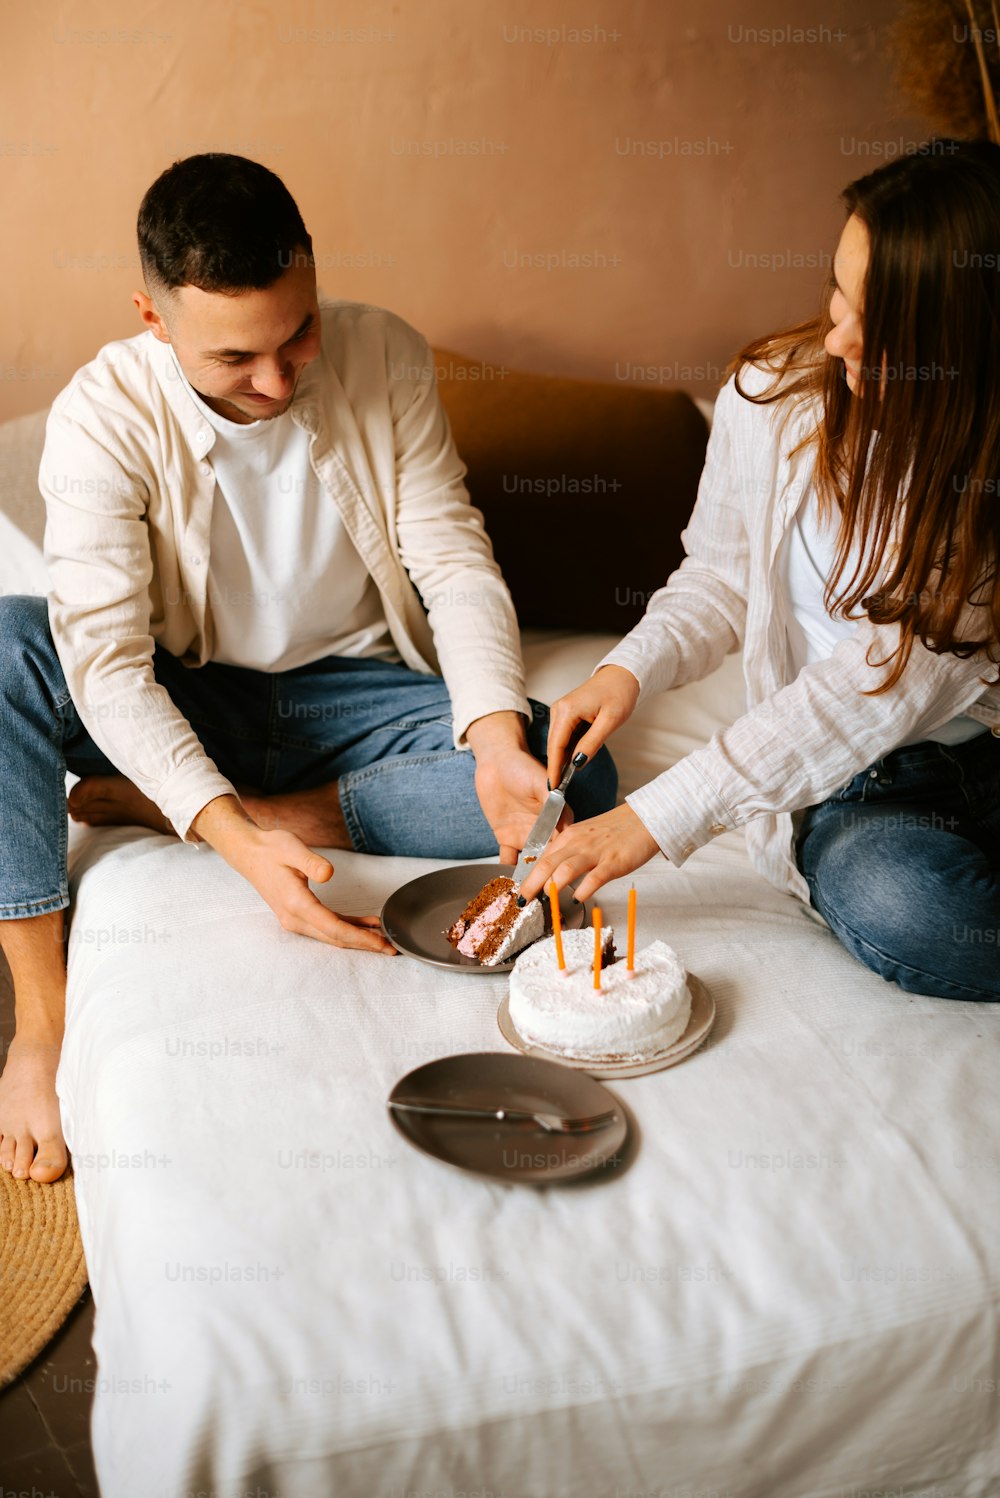 a man and woman sitting on a couch cutting a cake